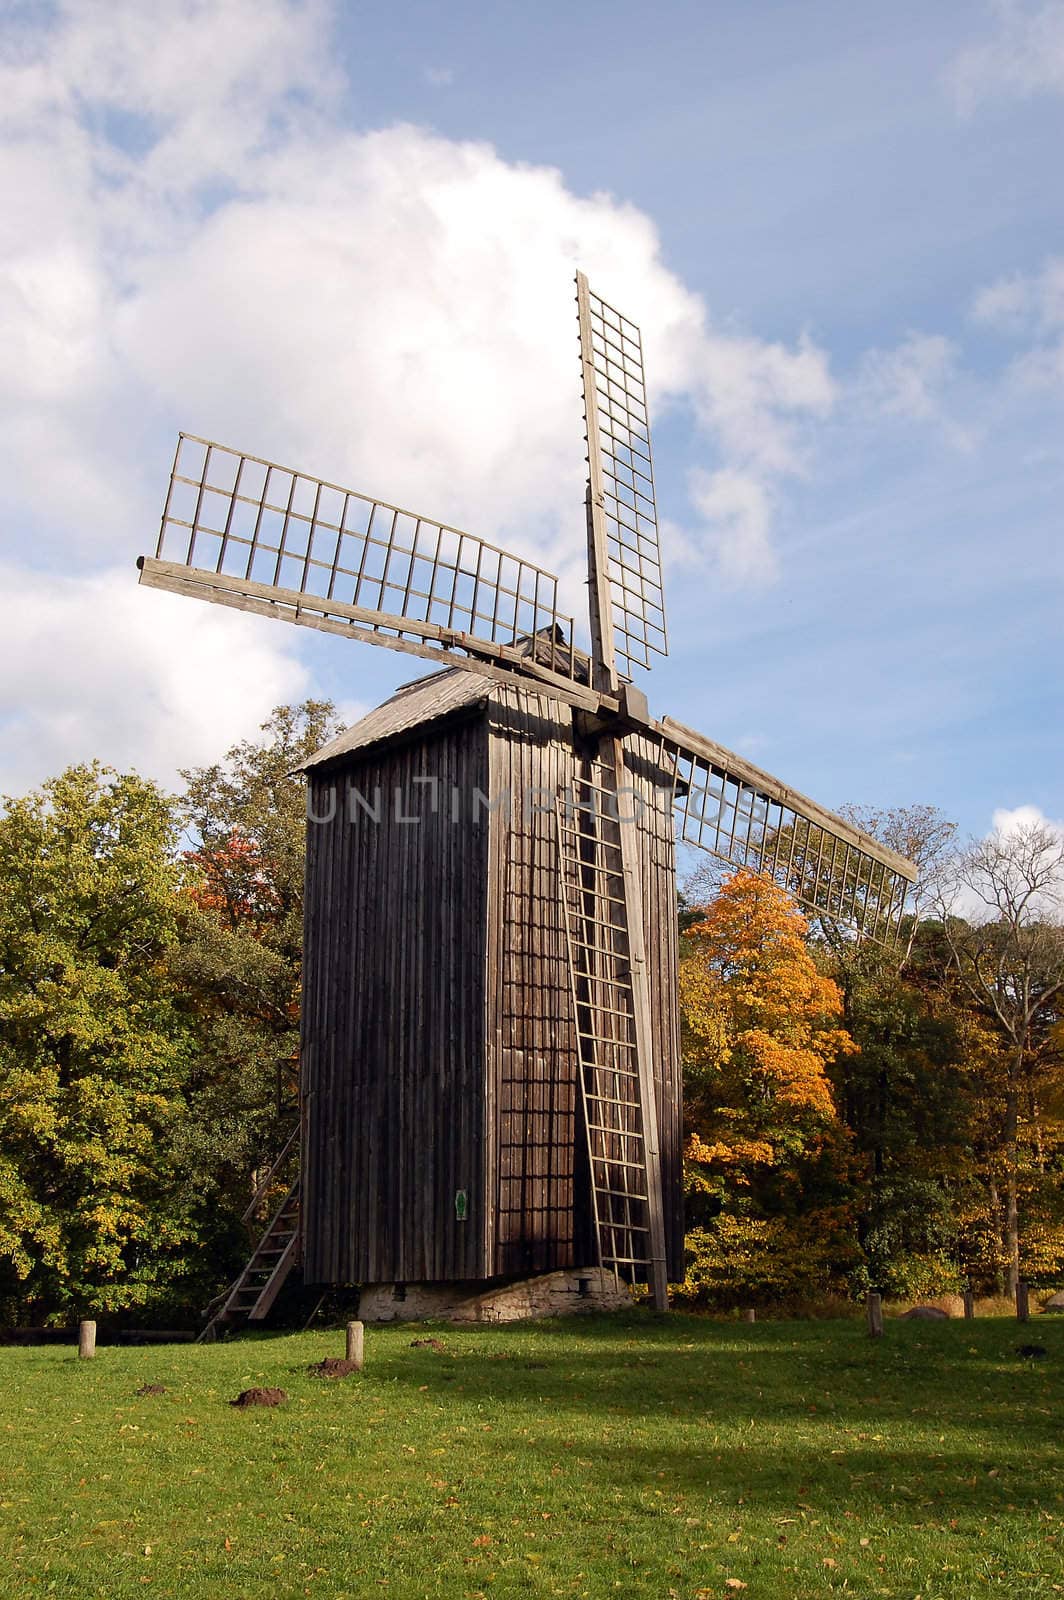 Old windmill in the front of autumn trees